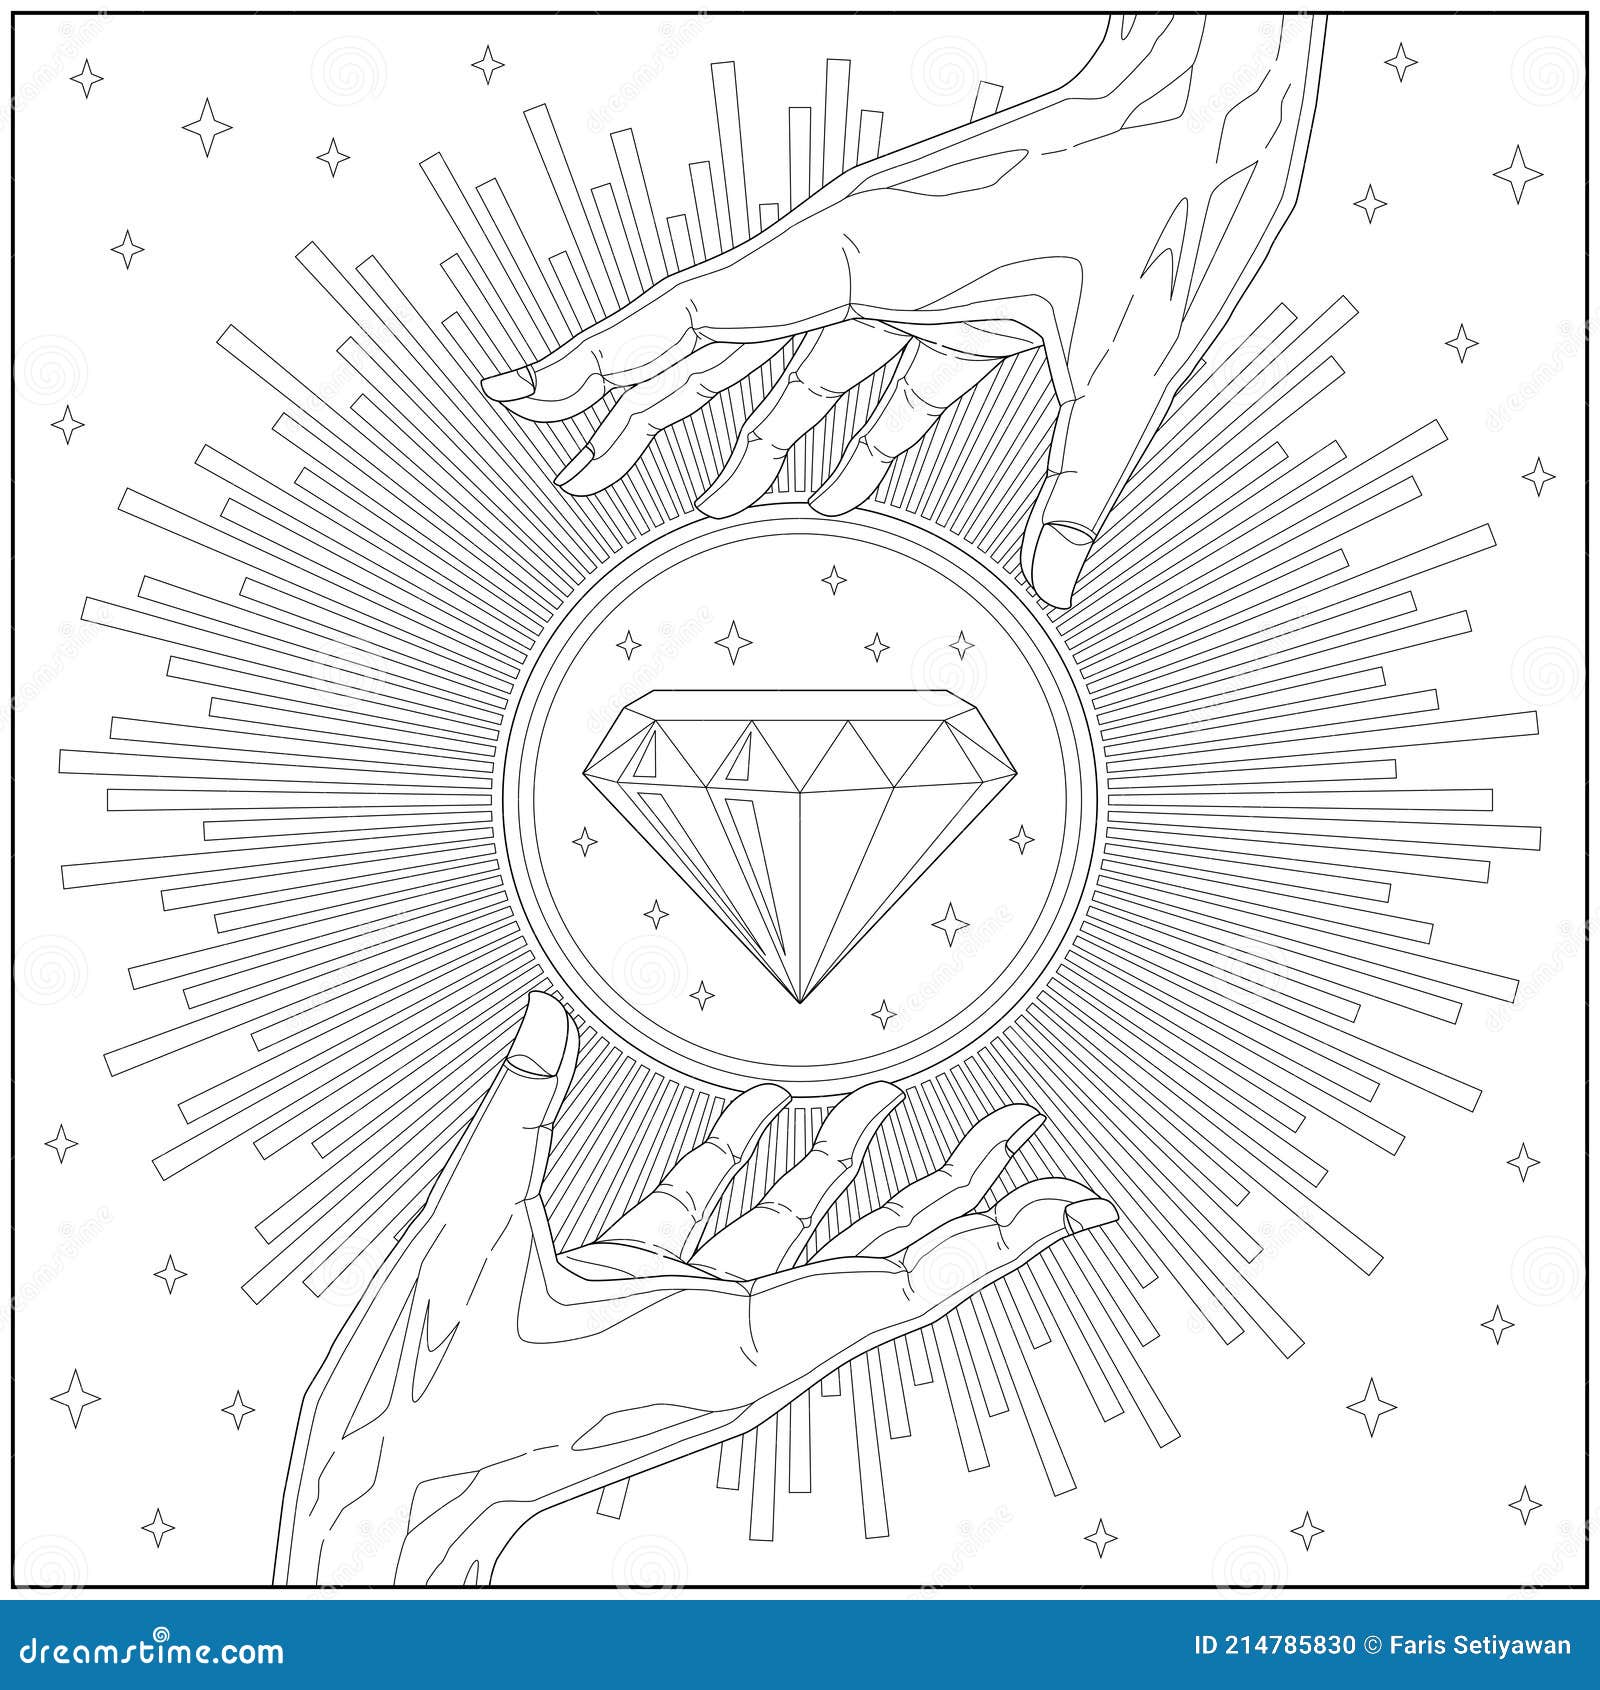 Fantasy hand over shining emerald gemstone learning and education coloring page stock vector